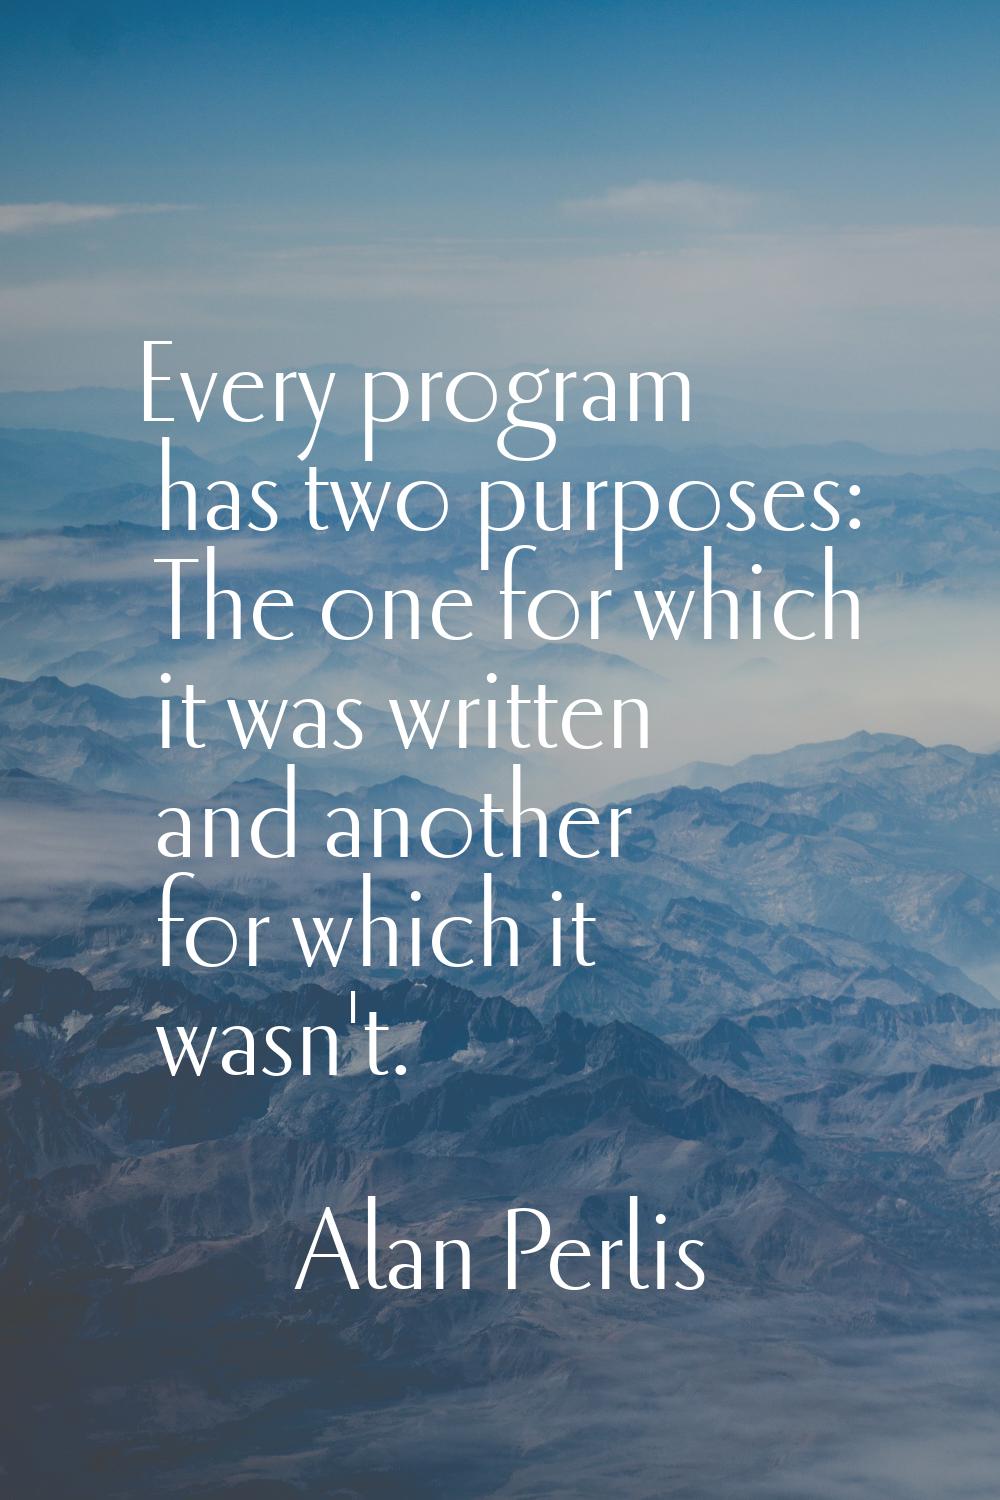 Every program has two purposes: The one for which it was written and another for which it wasn't.